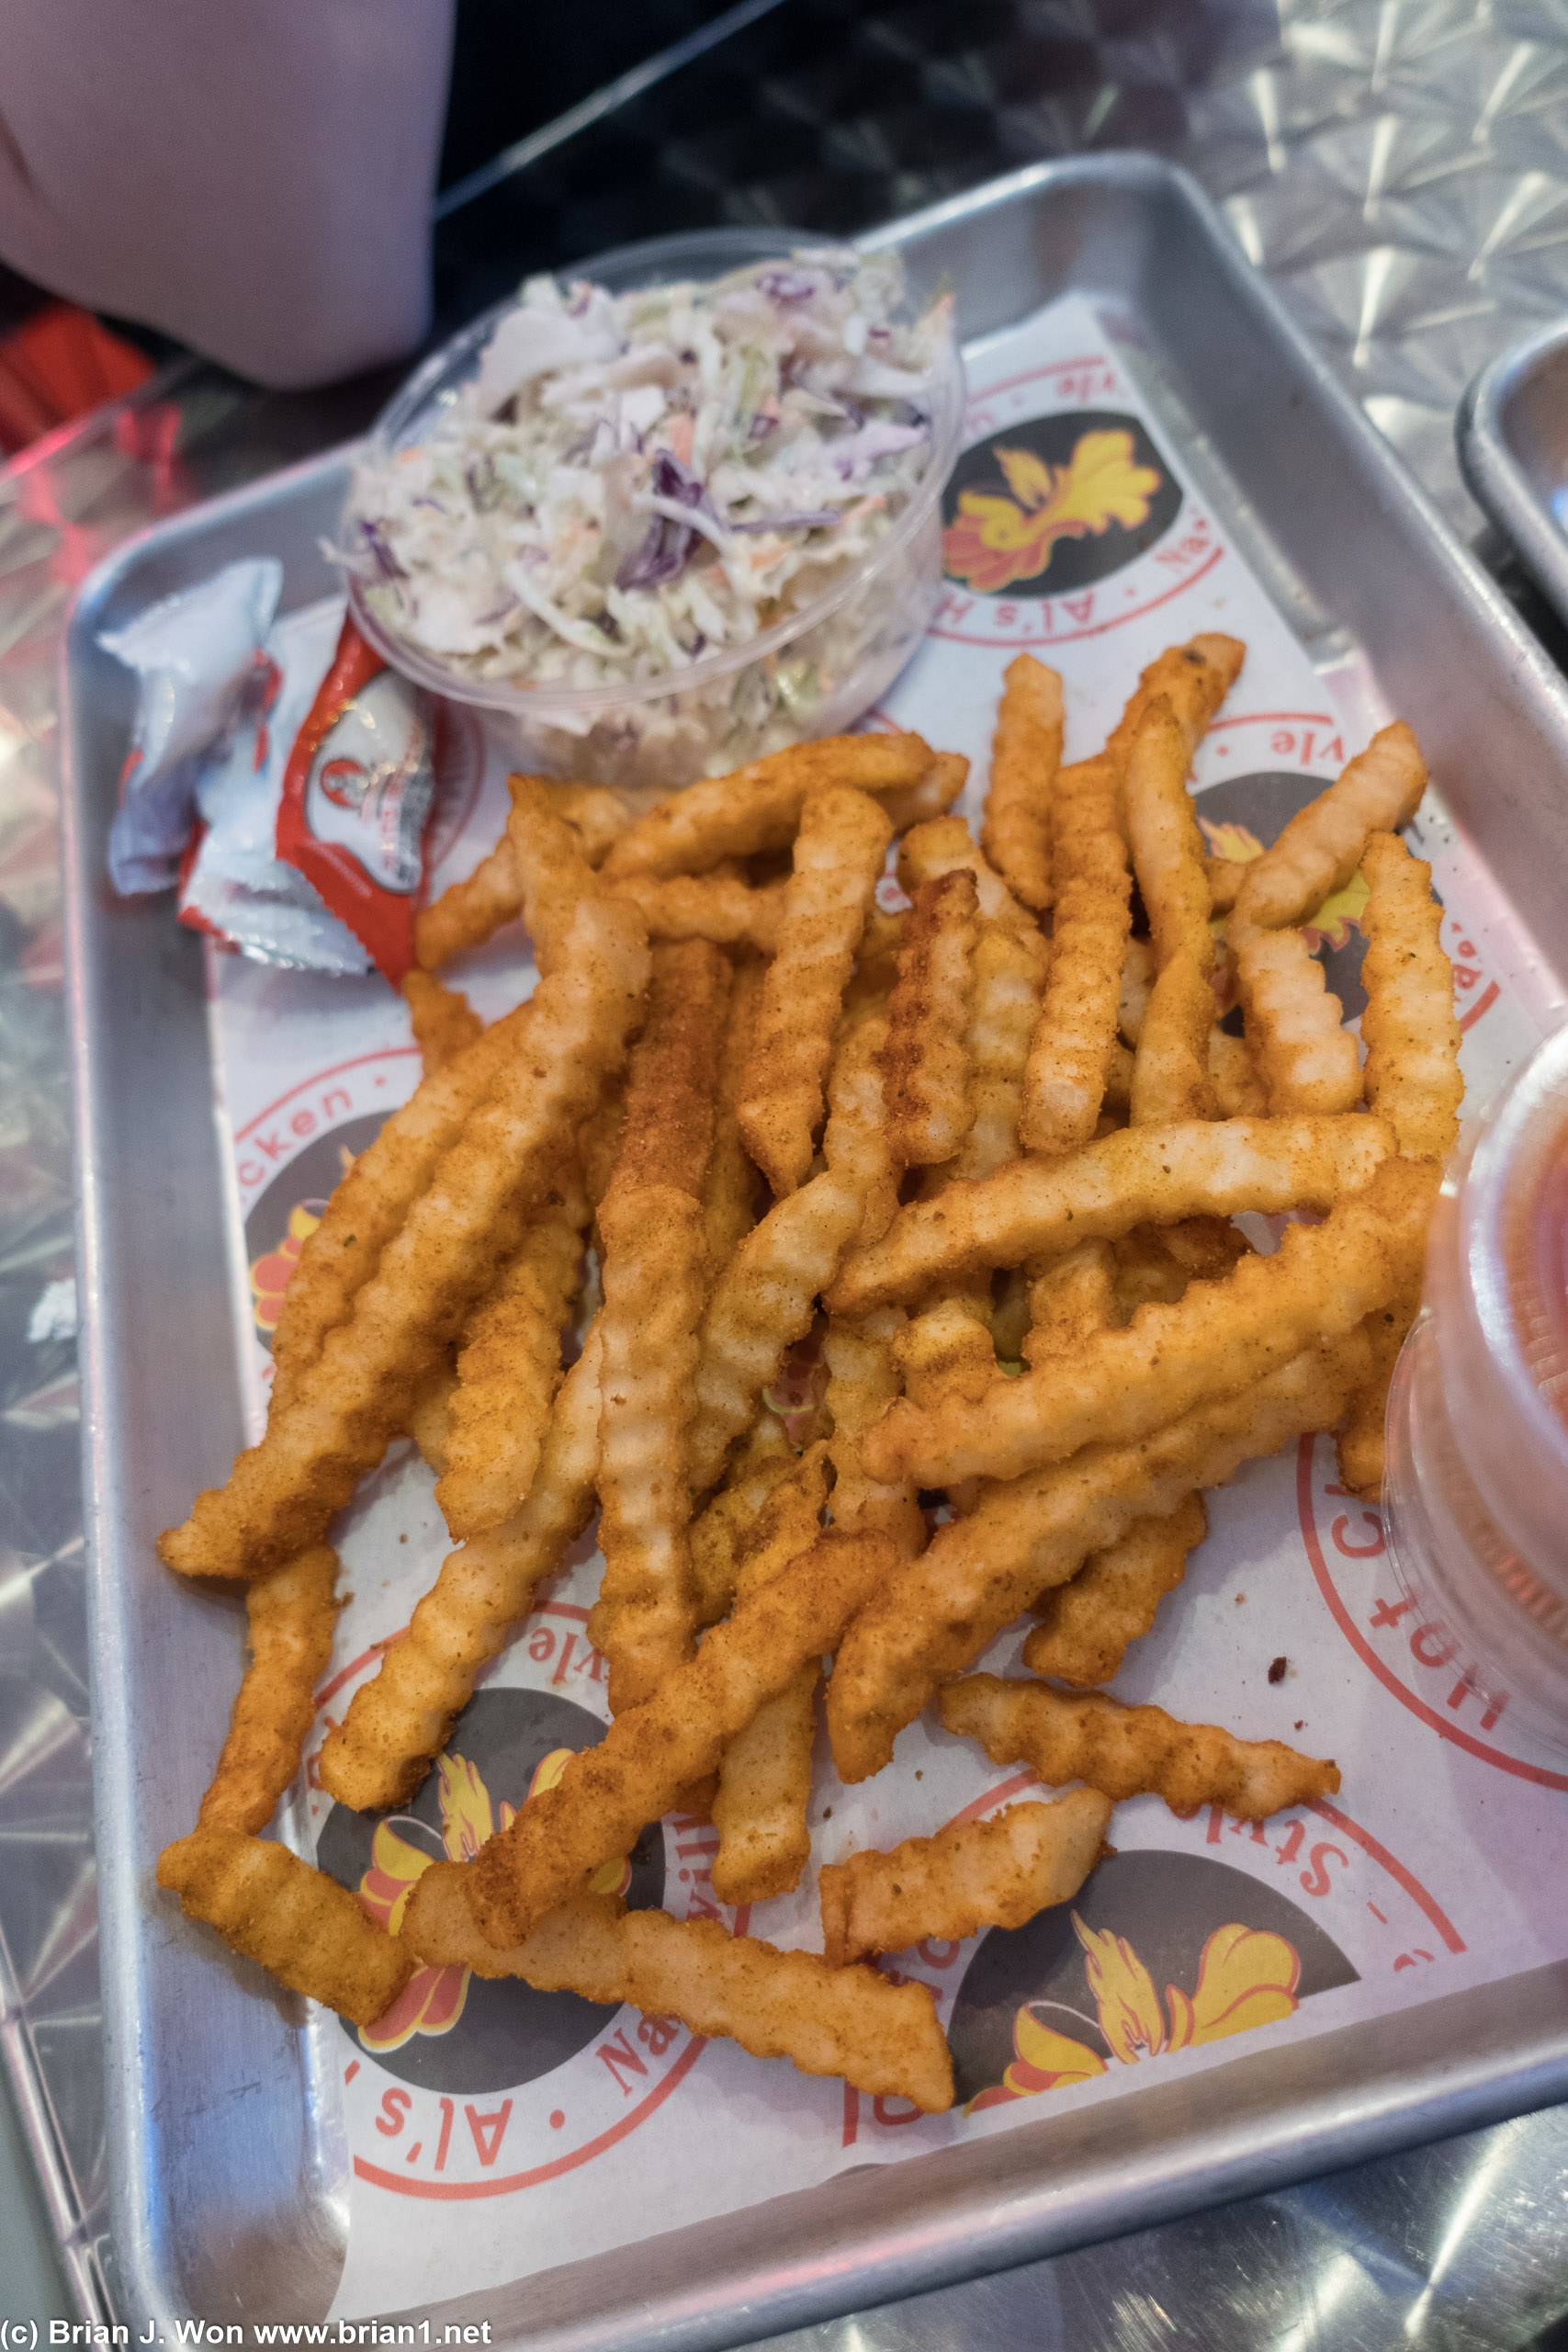 Fries and coleslaw.